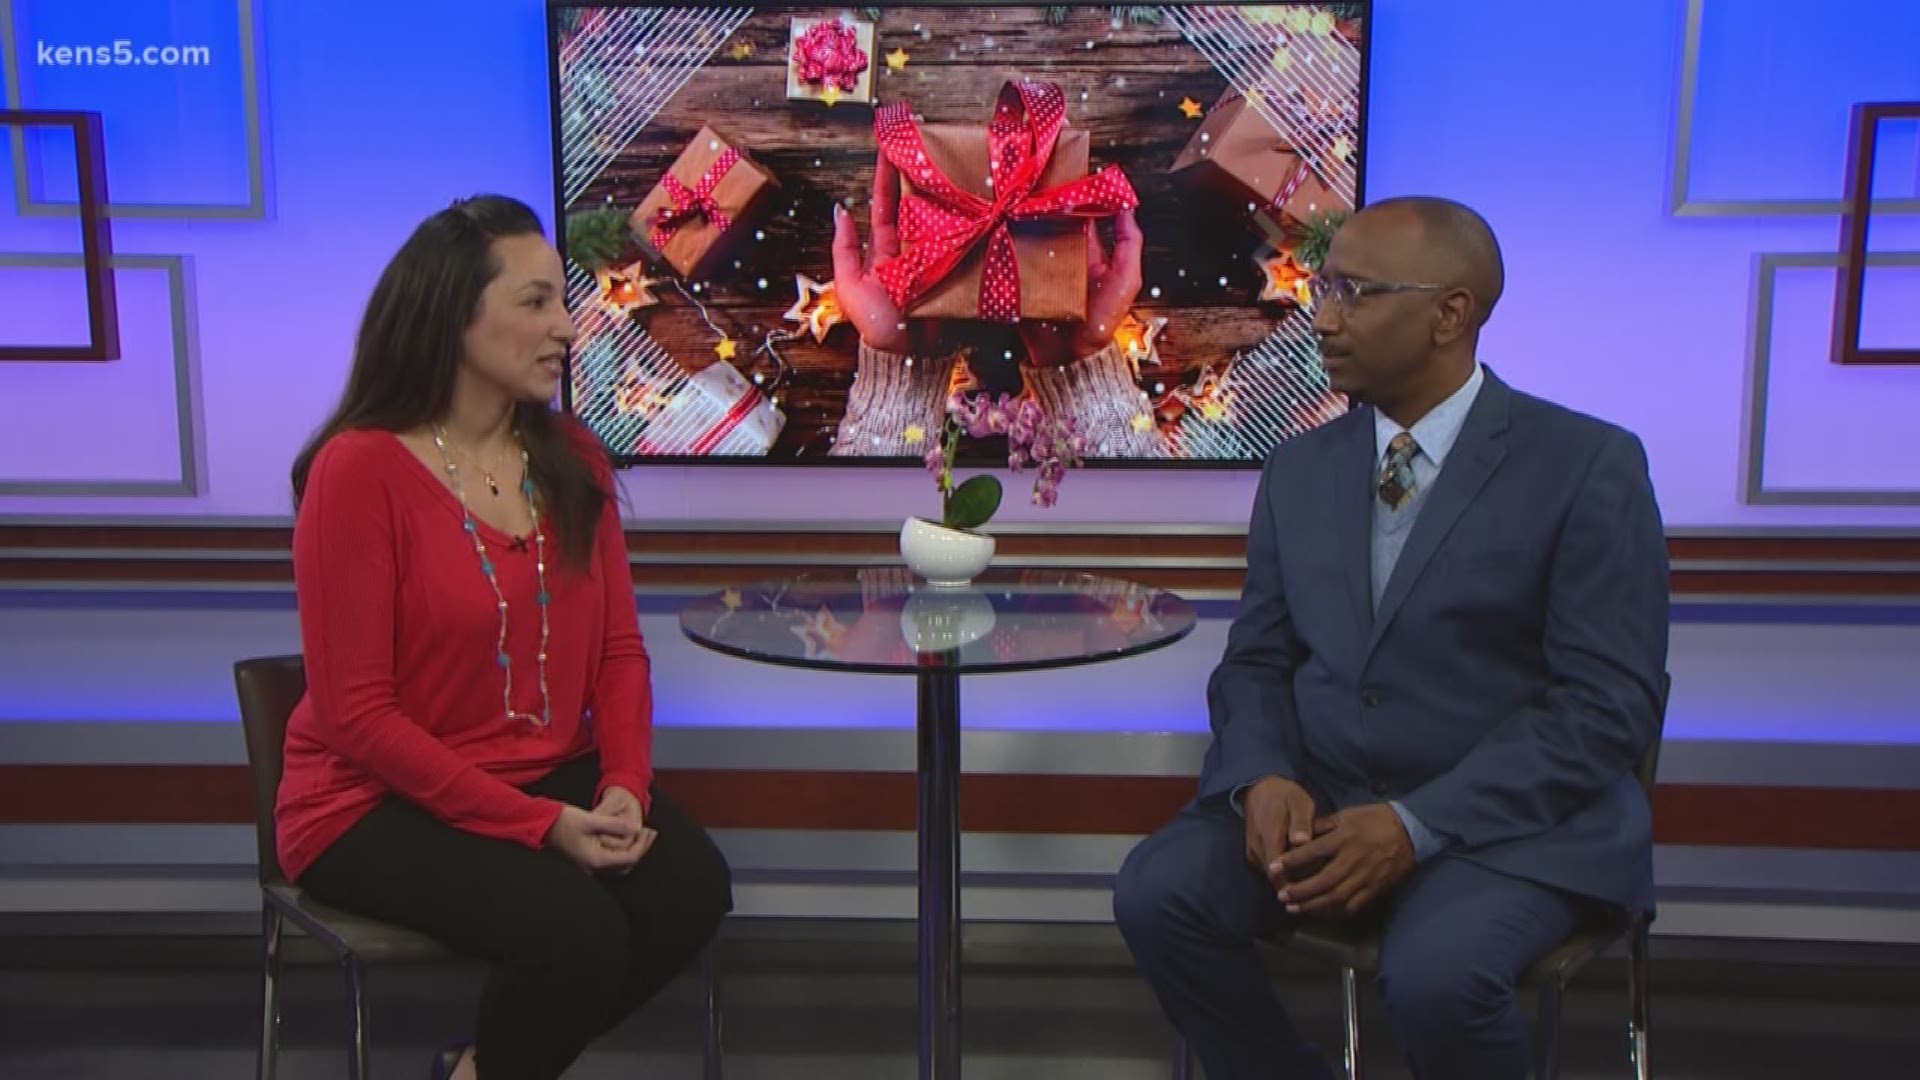 A representative from Jefferson Bank stopped by the KENS 5 studio Sunday morning to provide some tips on how to keep our spending habits under control during the most spend-happy time of the year.